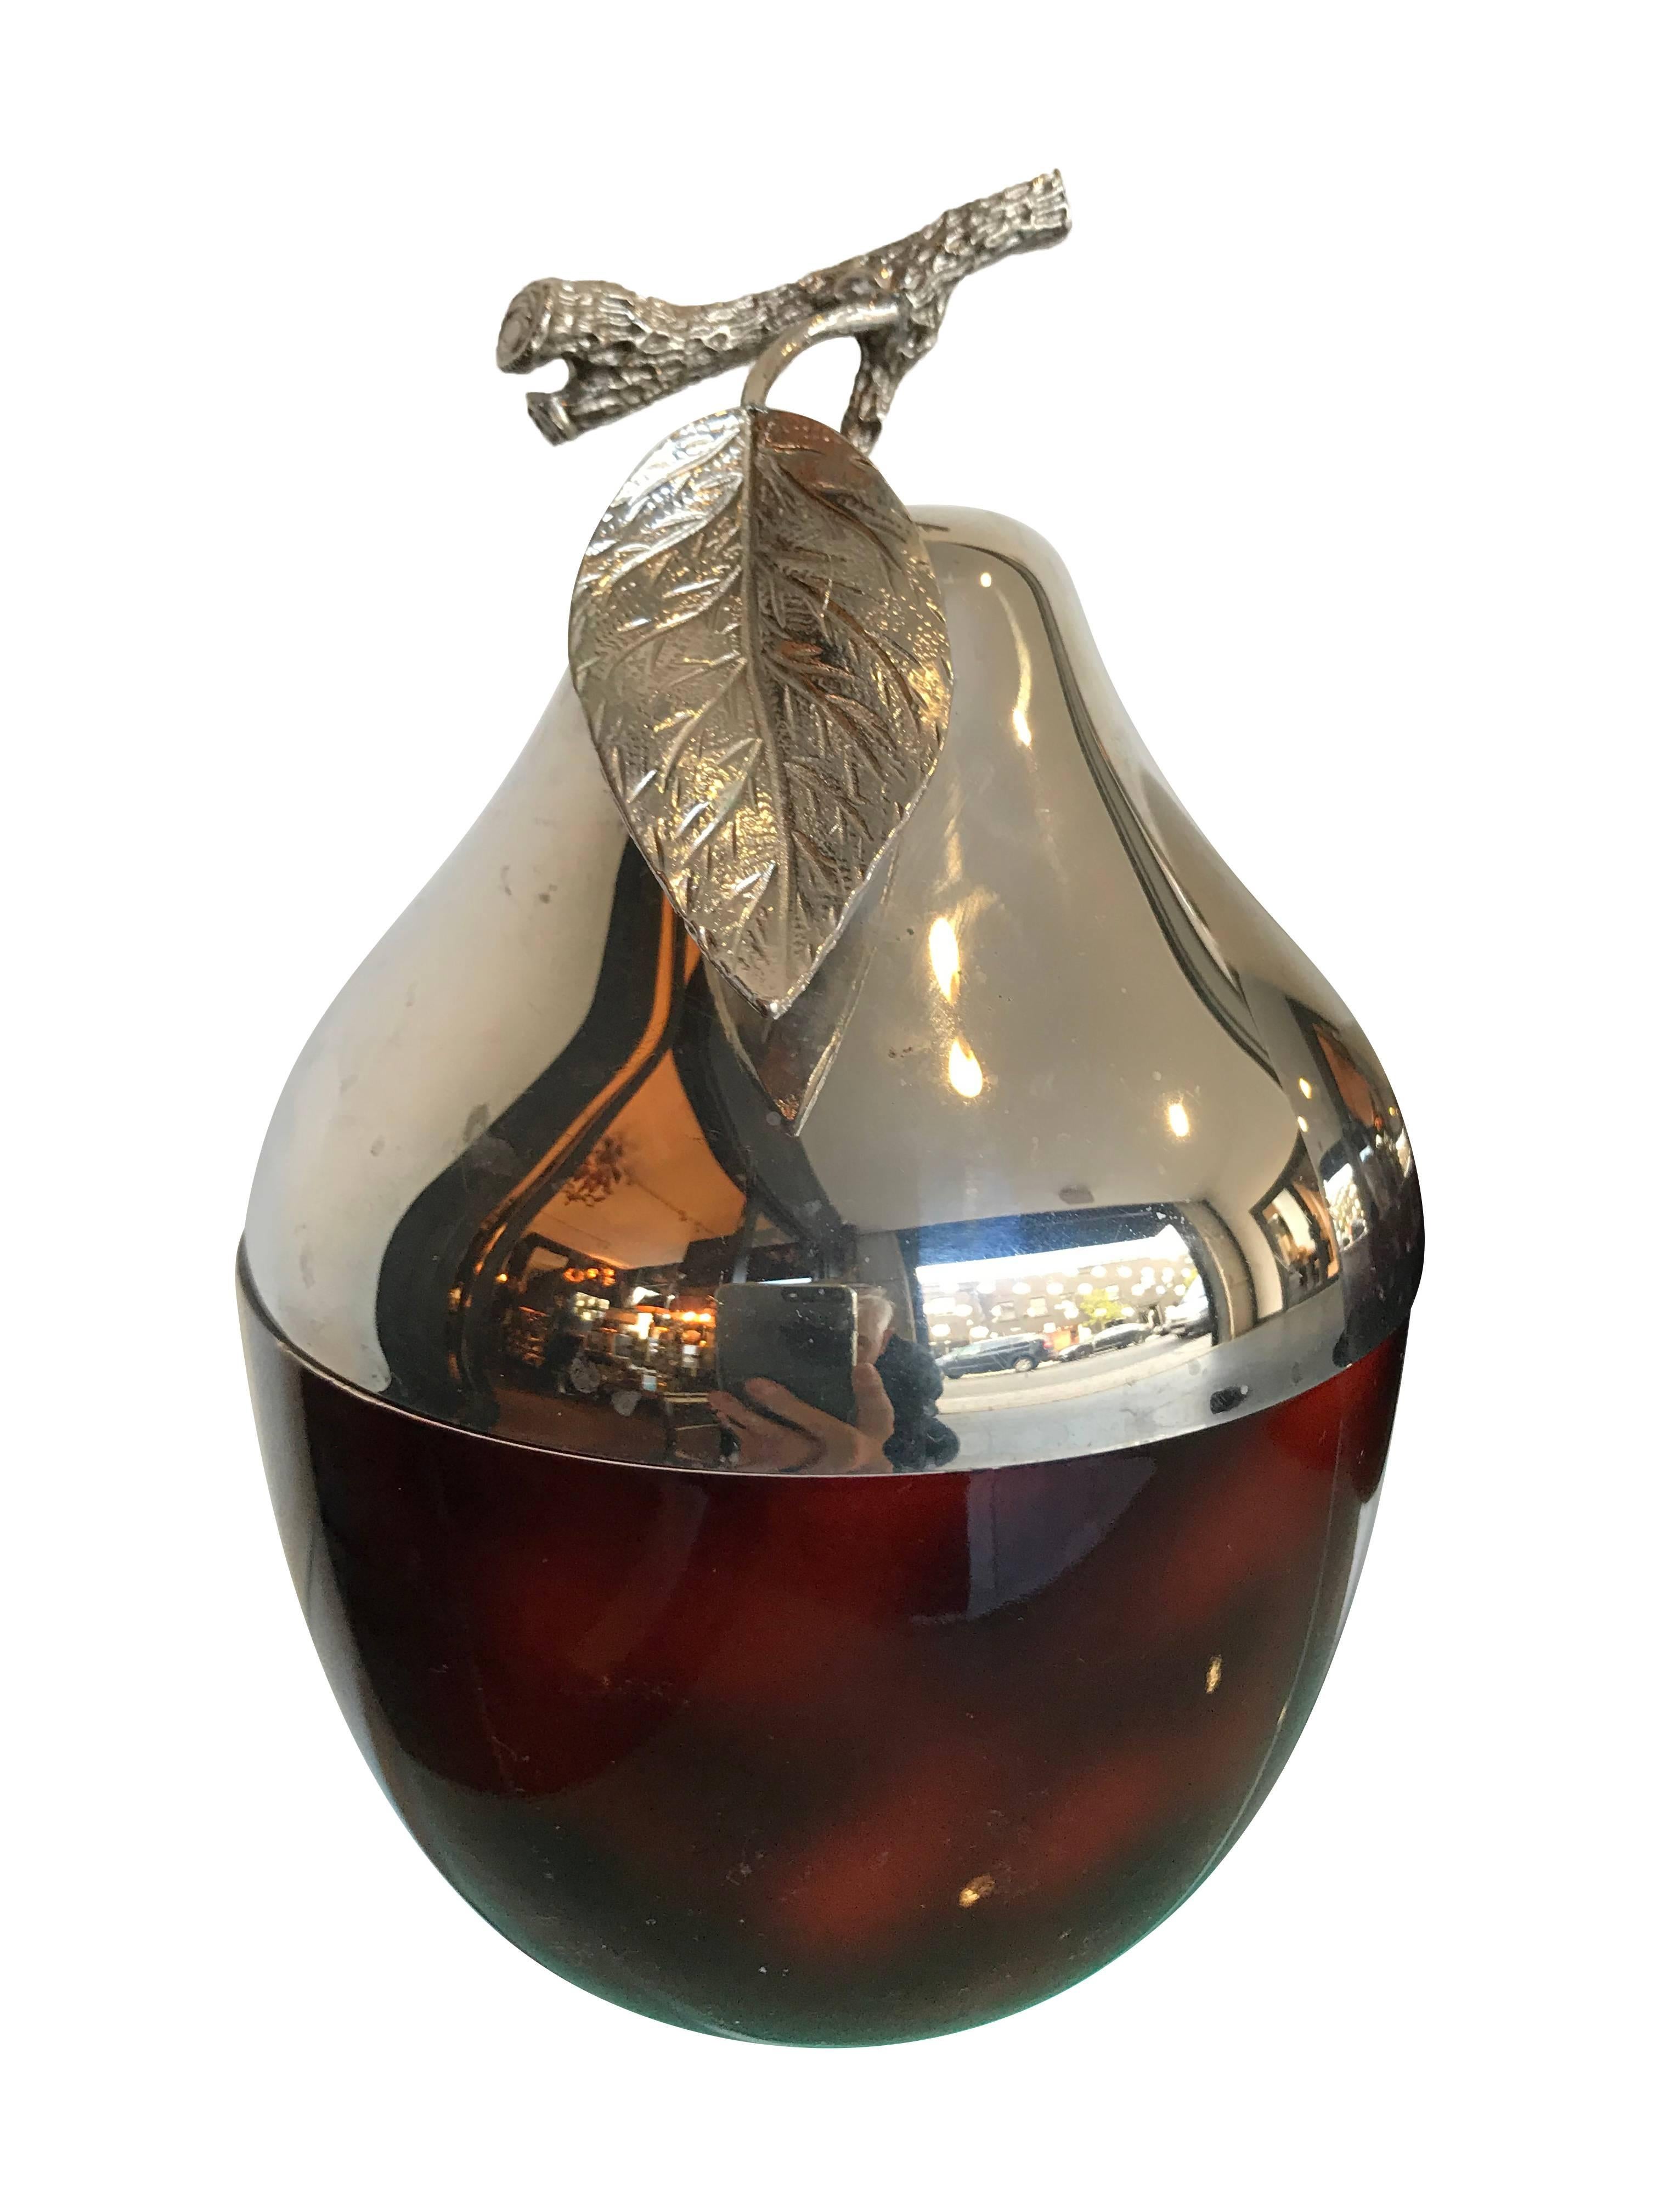 A lovely pear shaped ice bucket, with chrome top with detailed stalk and leaf handle, on a faux tortoise shell, acrylic base.